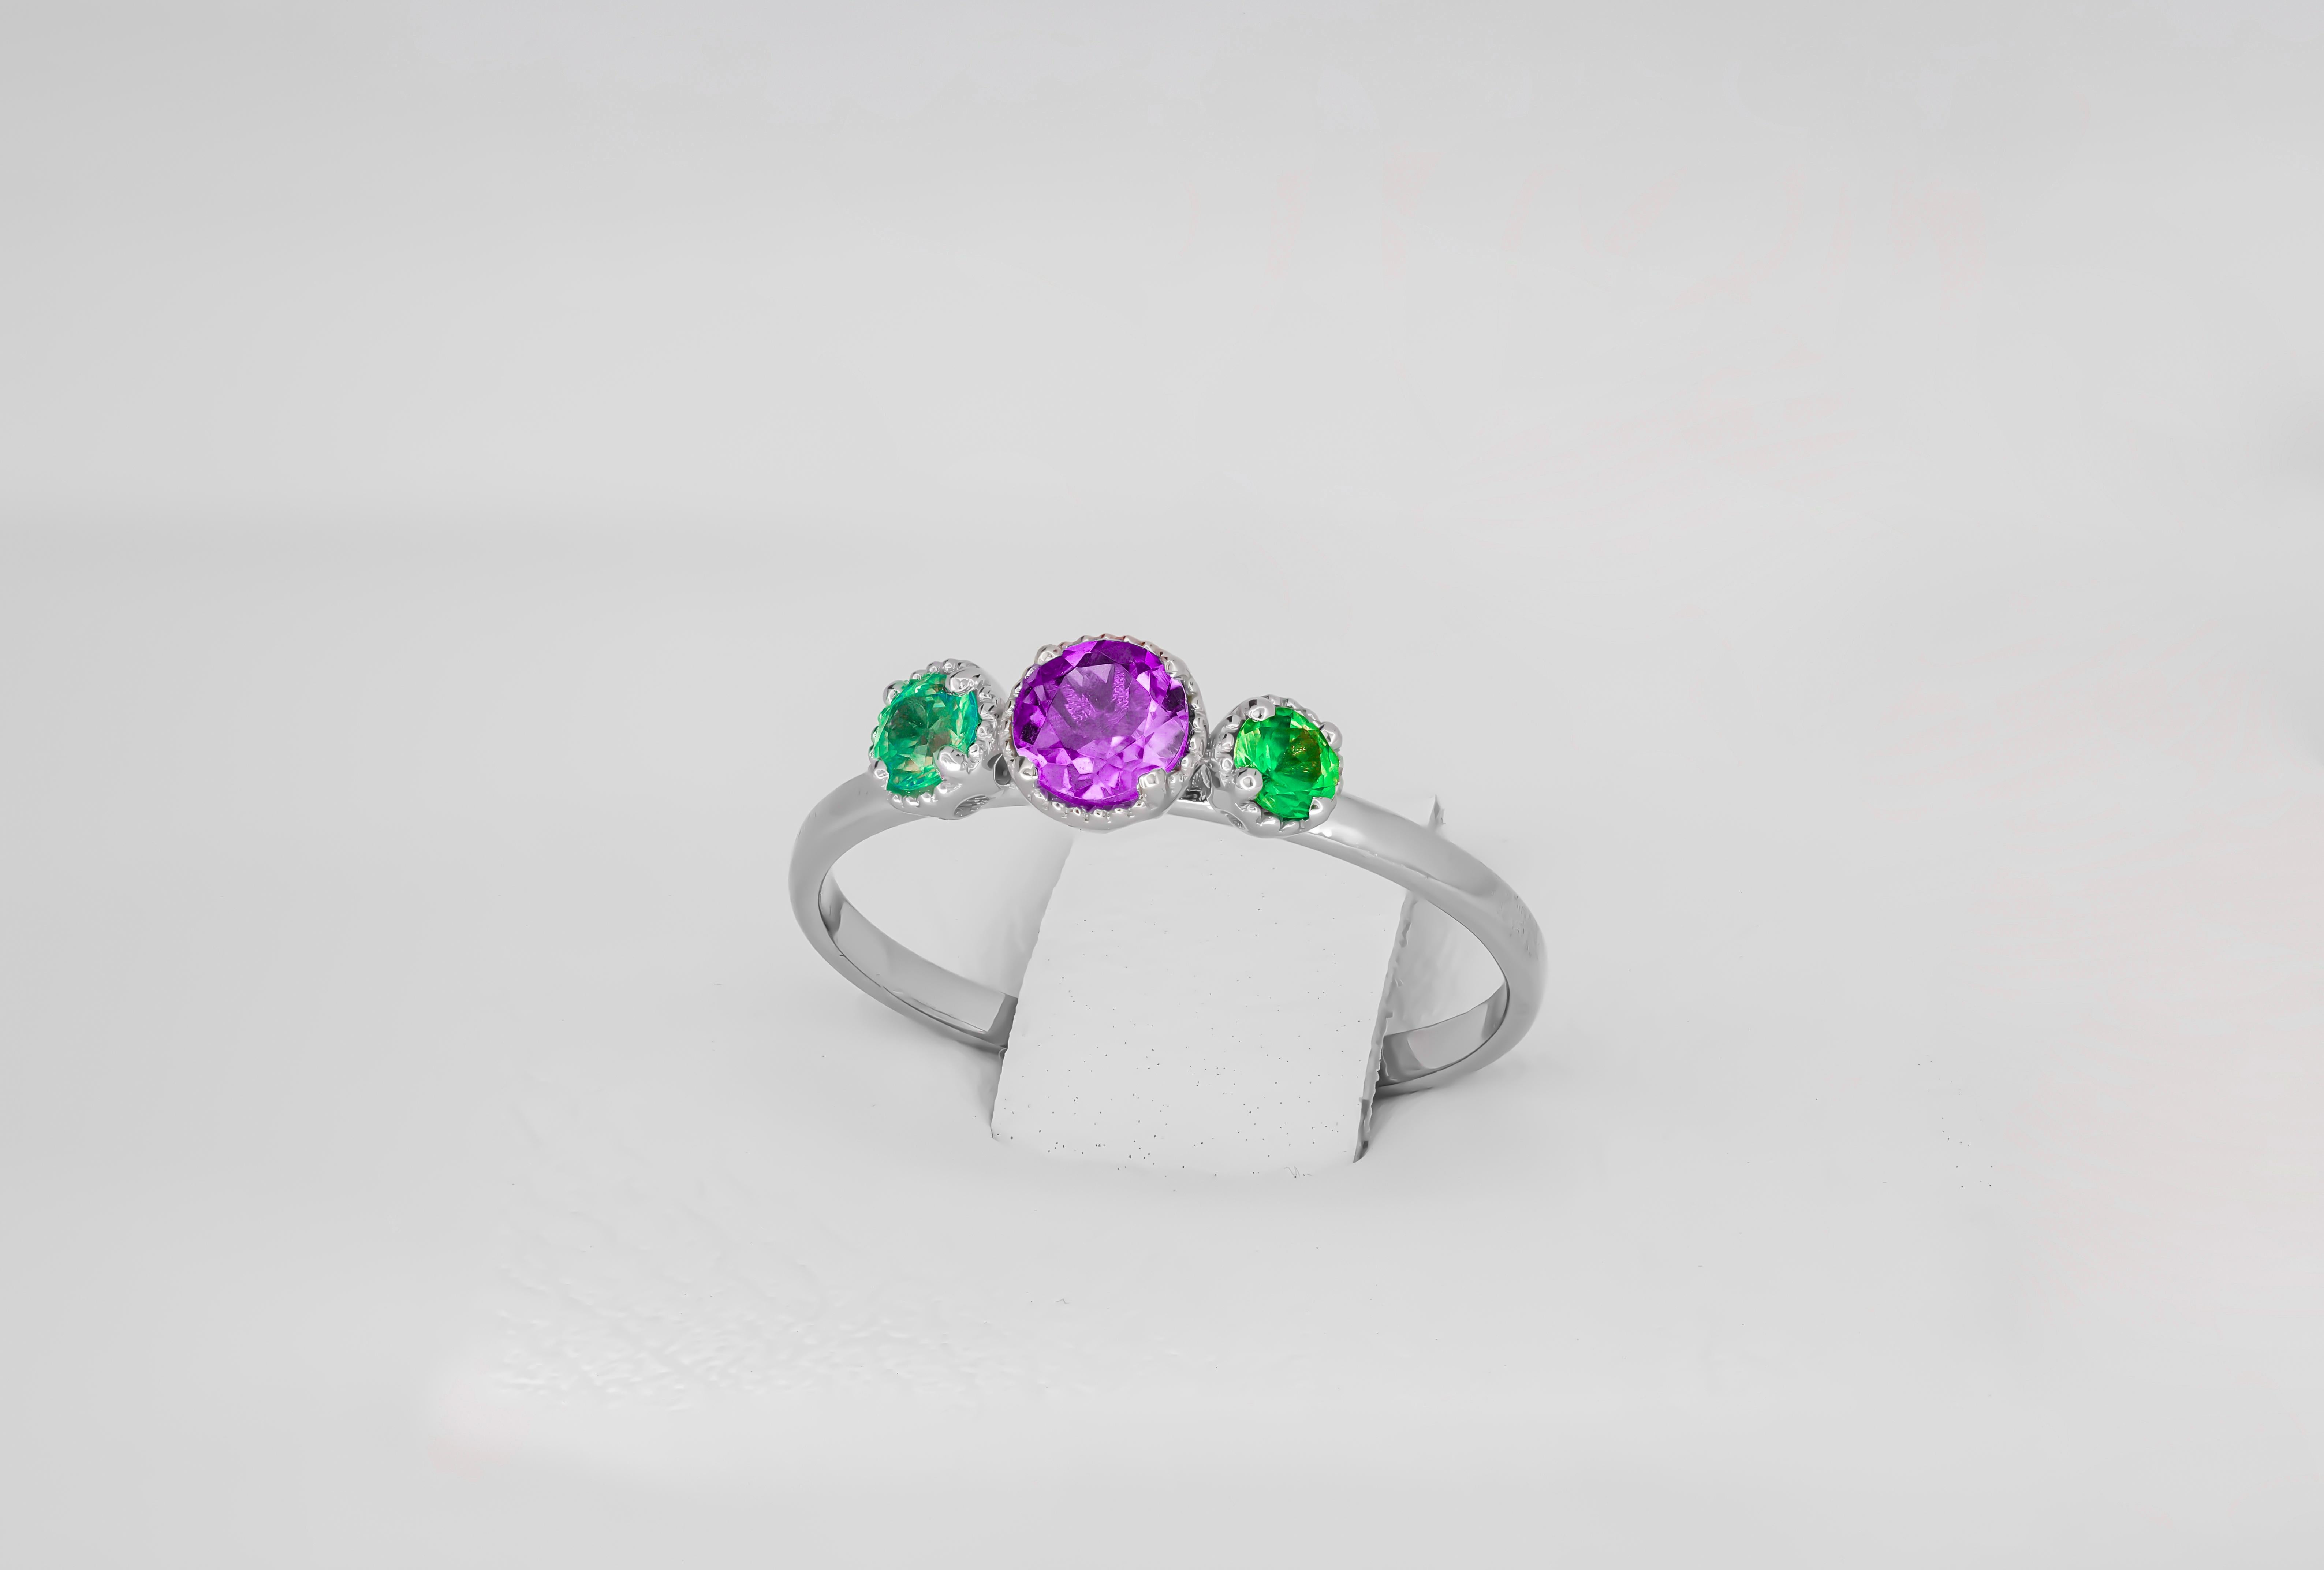 Women's Green and purple gem 14k gold ring. For Sale